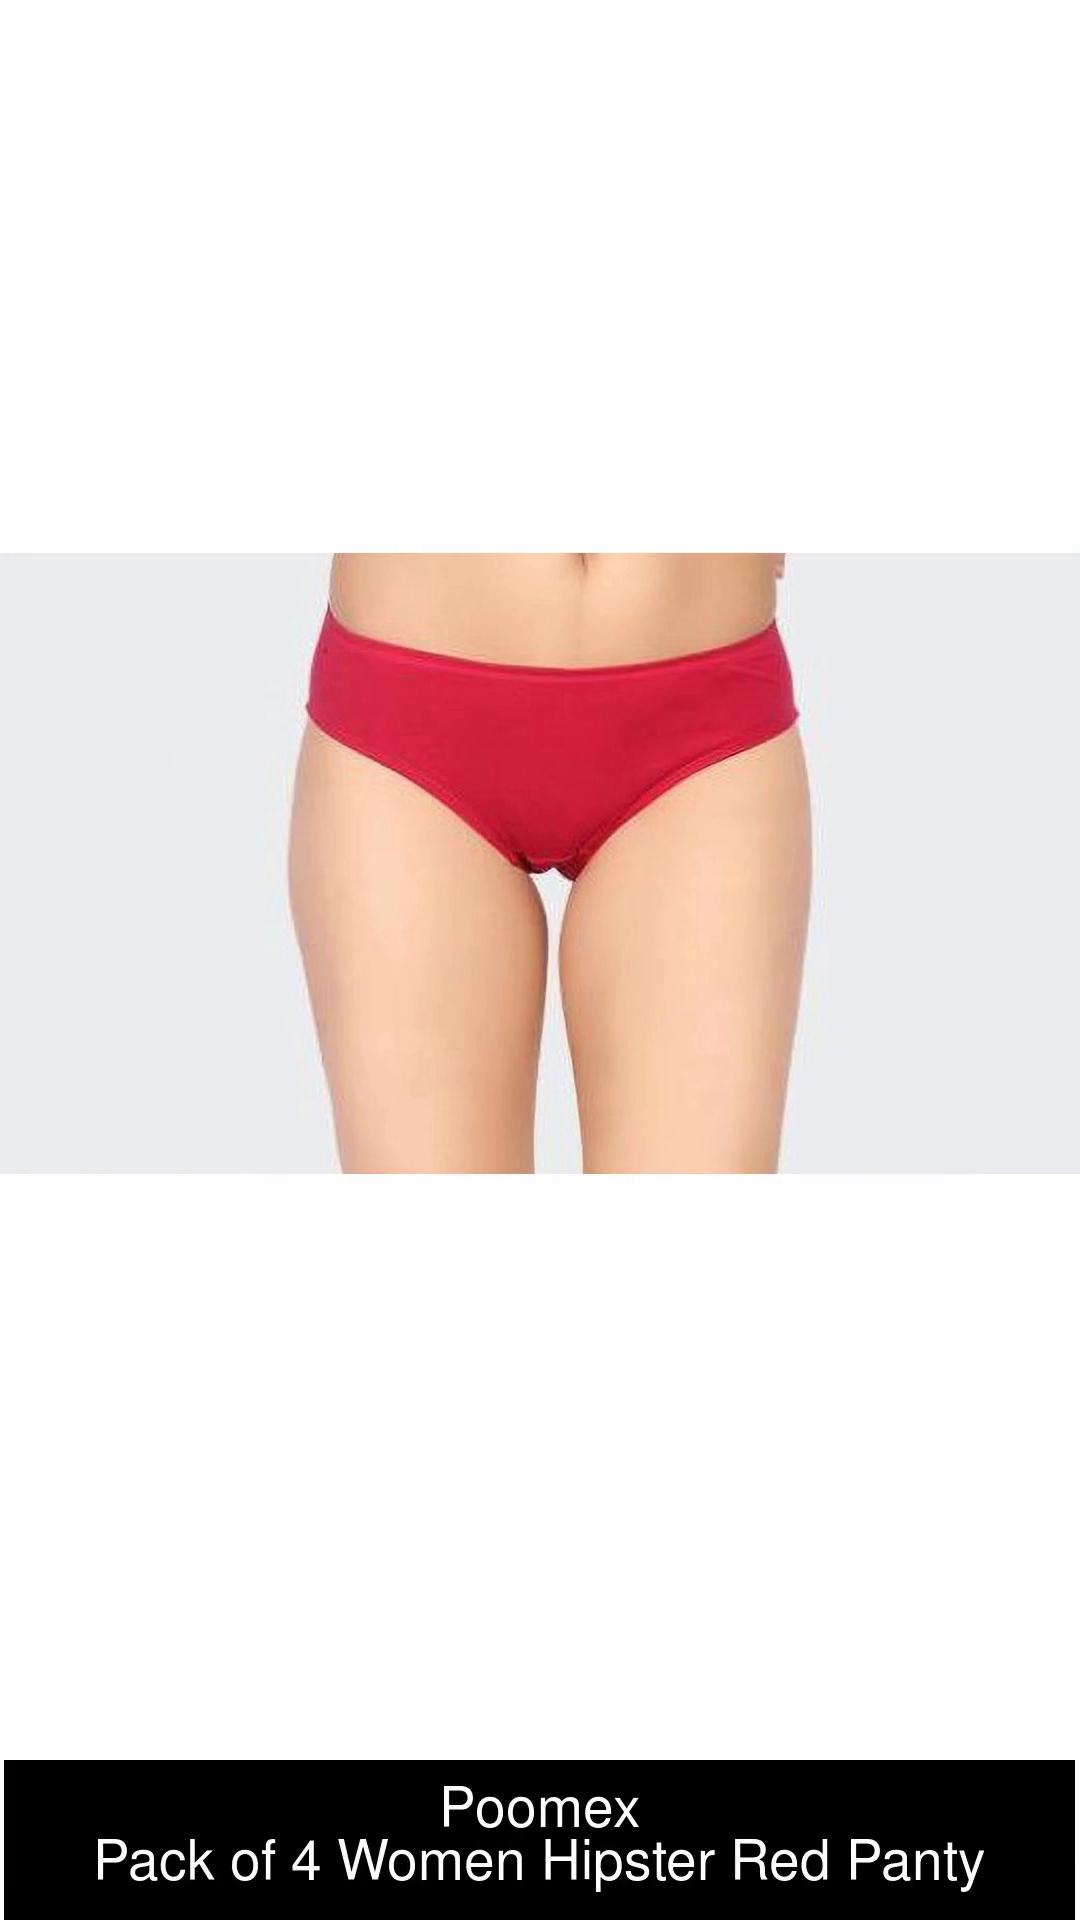 Poomex Women Hipster Red Panty - Buy Poomex Women Hipster Red